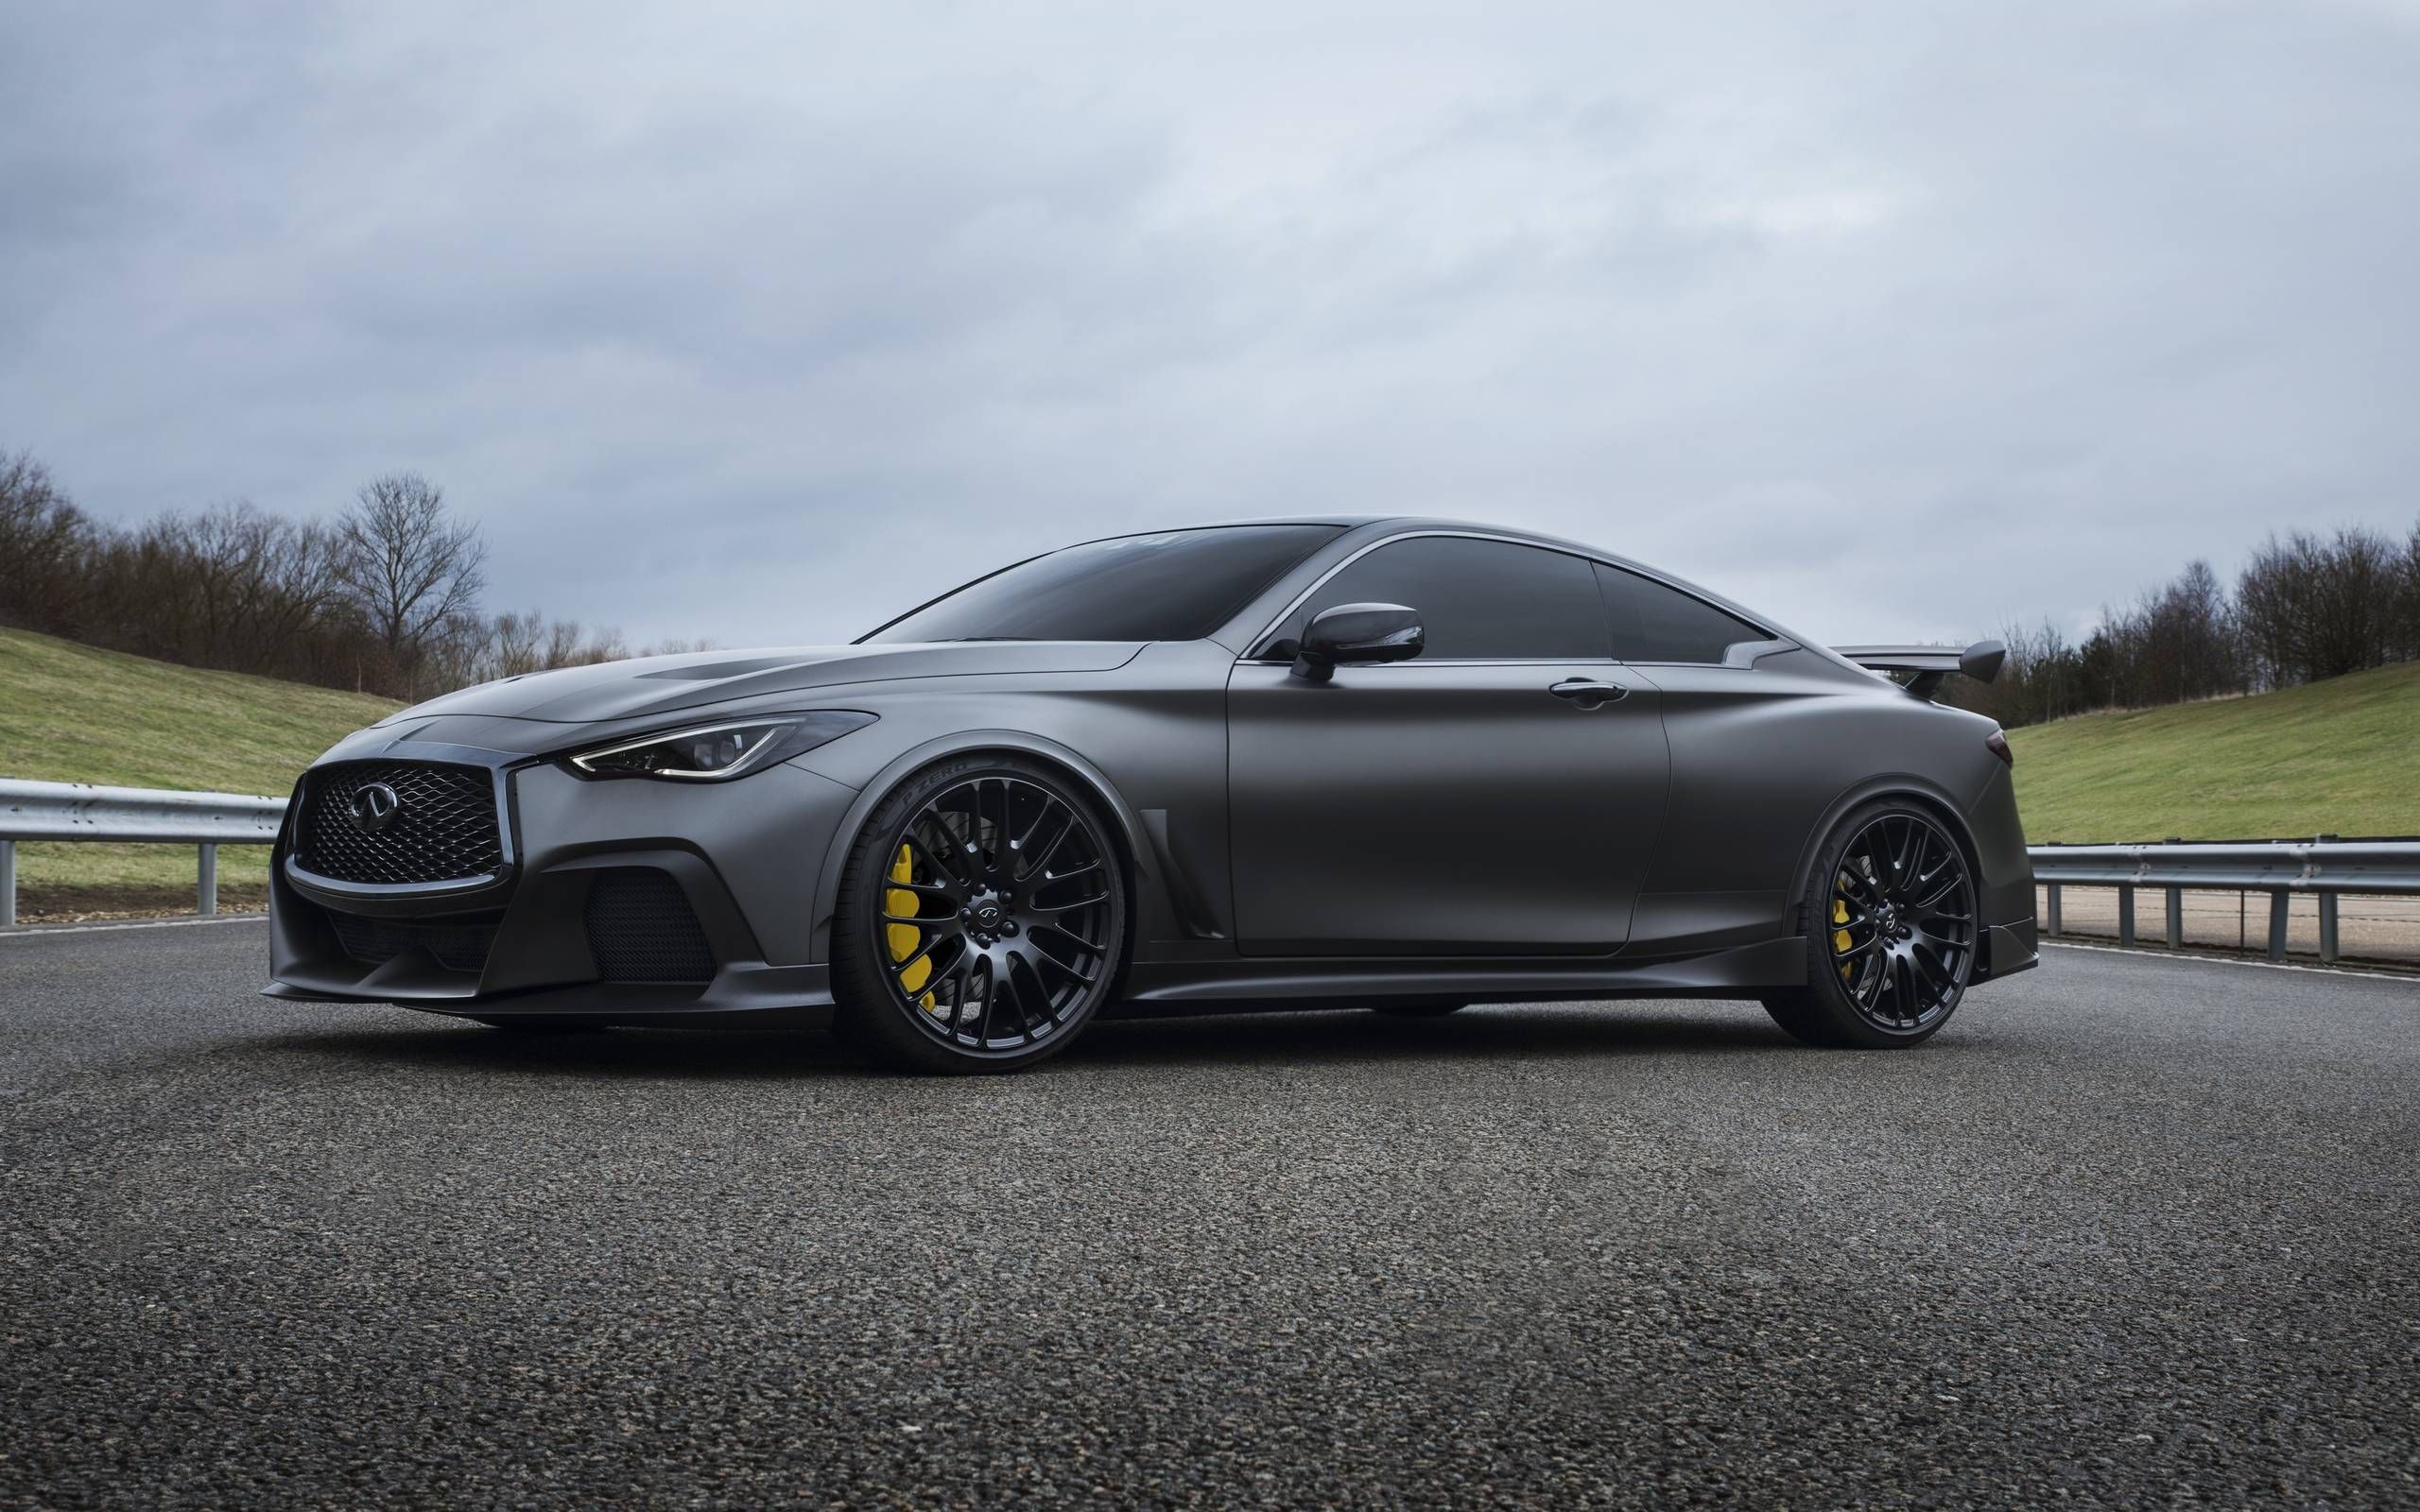 The Infiniti Q60 Project Black S Dies before Arrival